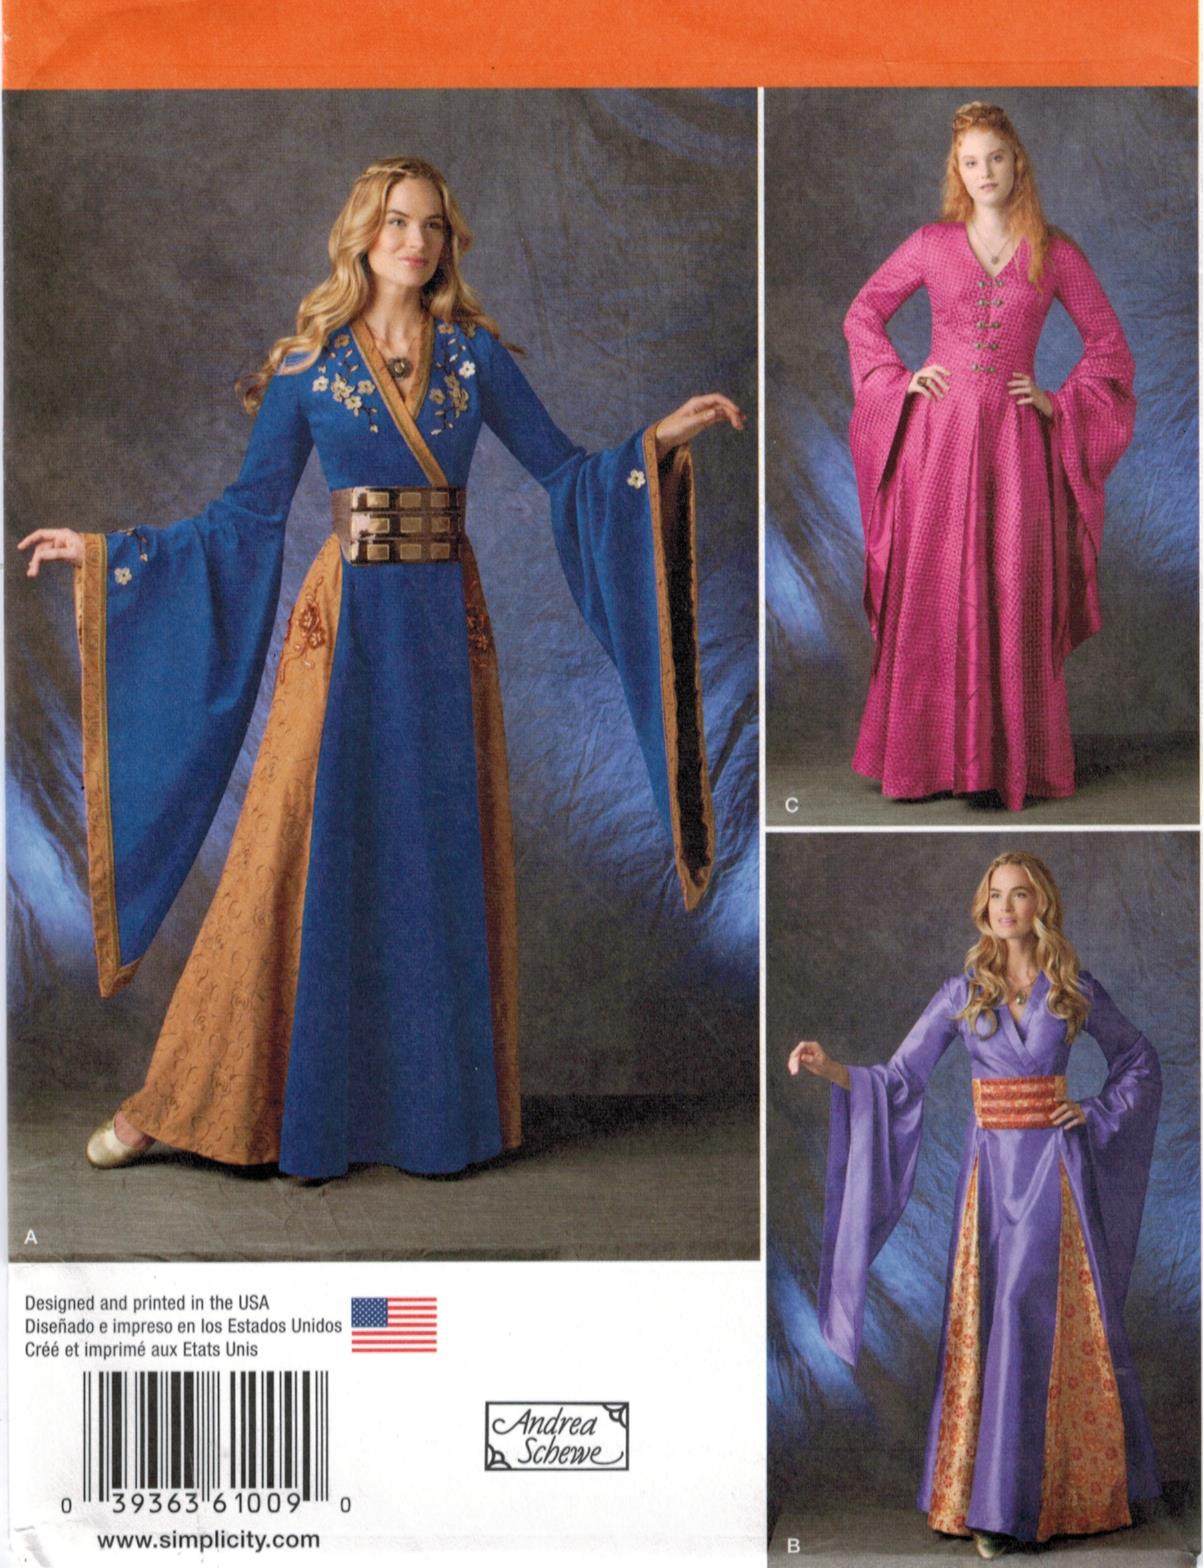 38+ Simplicity Medieval Costume Patterns - RoxaneClerise